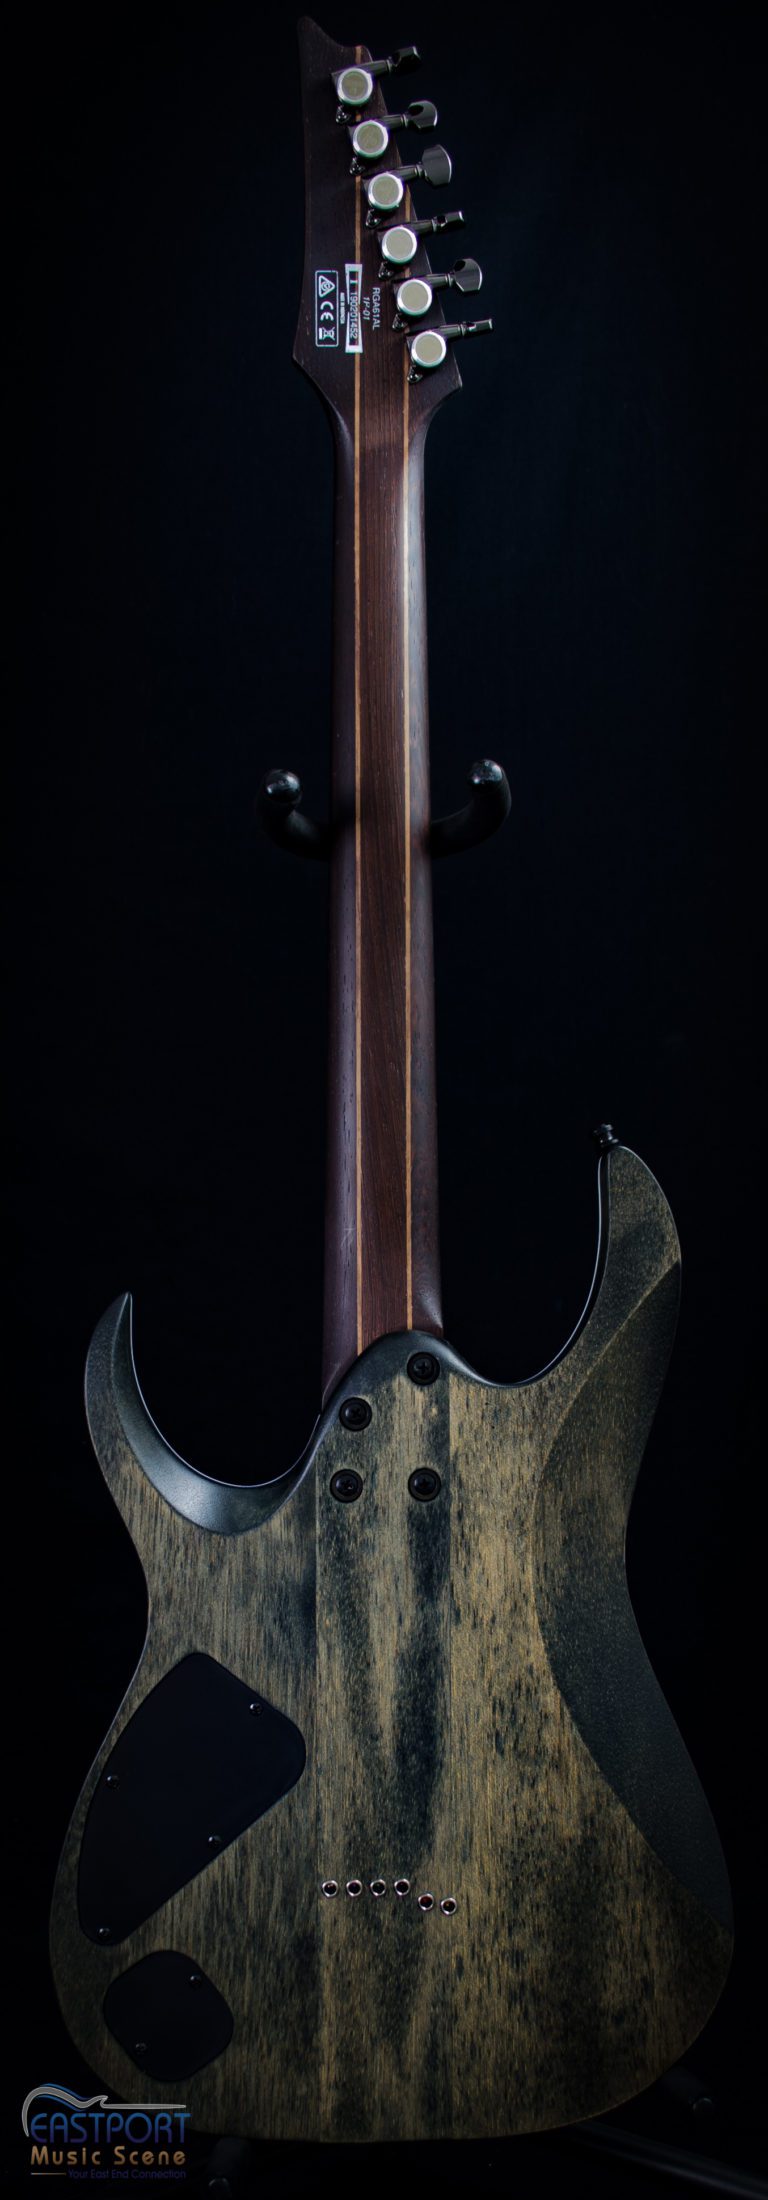 A guitar with a wooden handle and metal head.